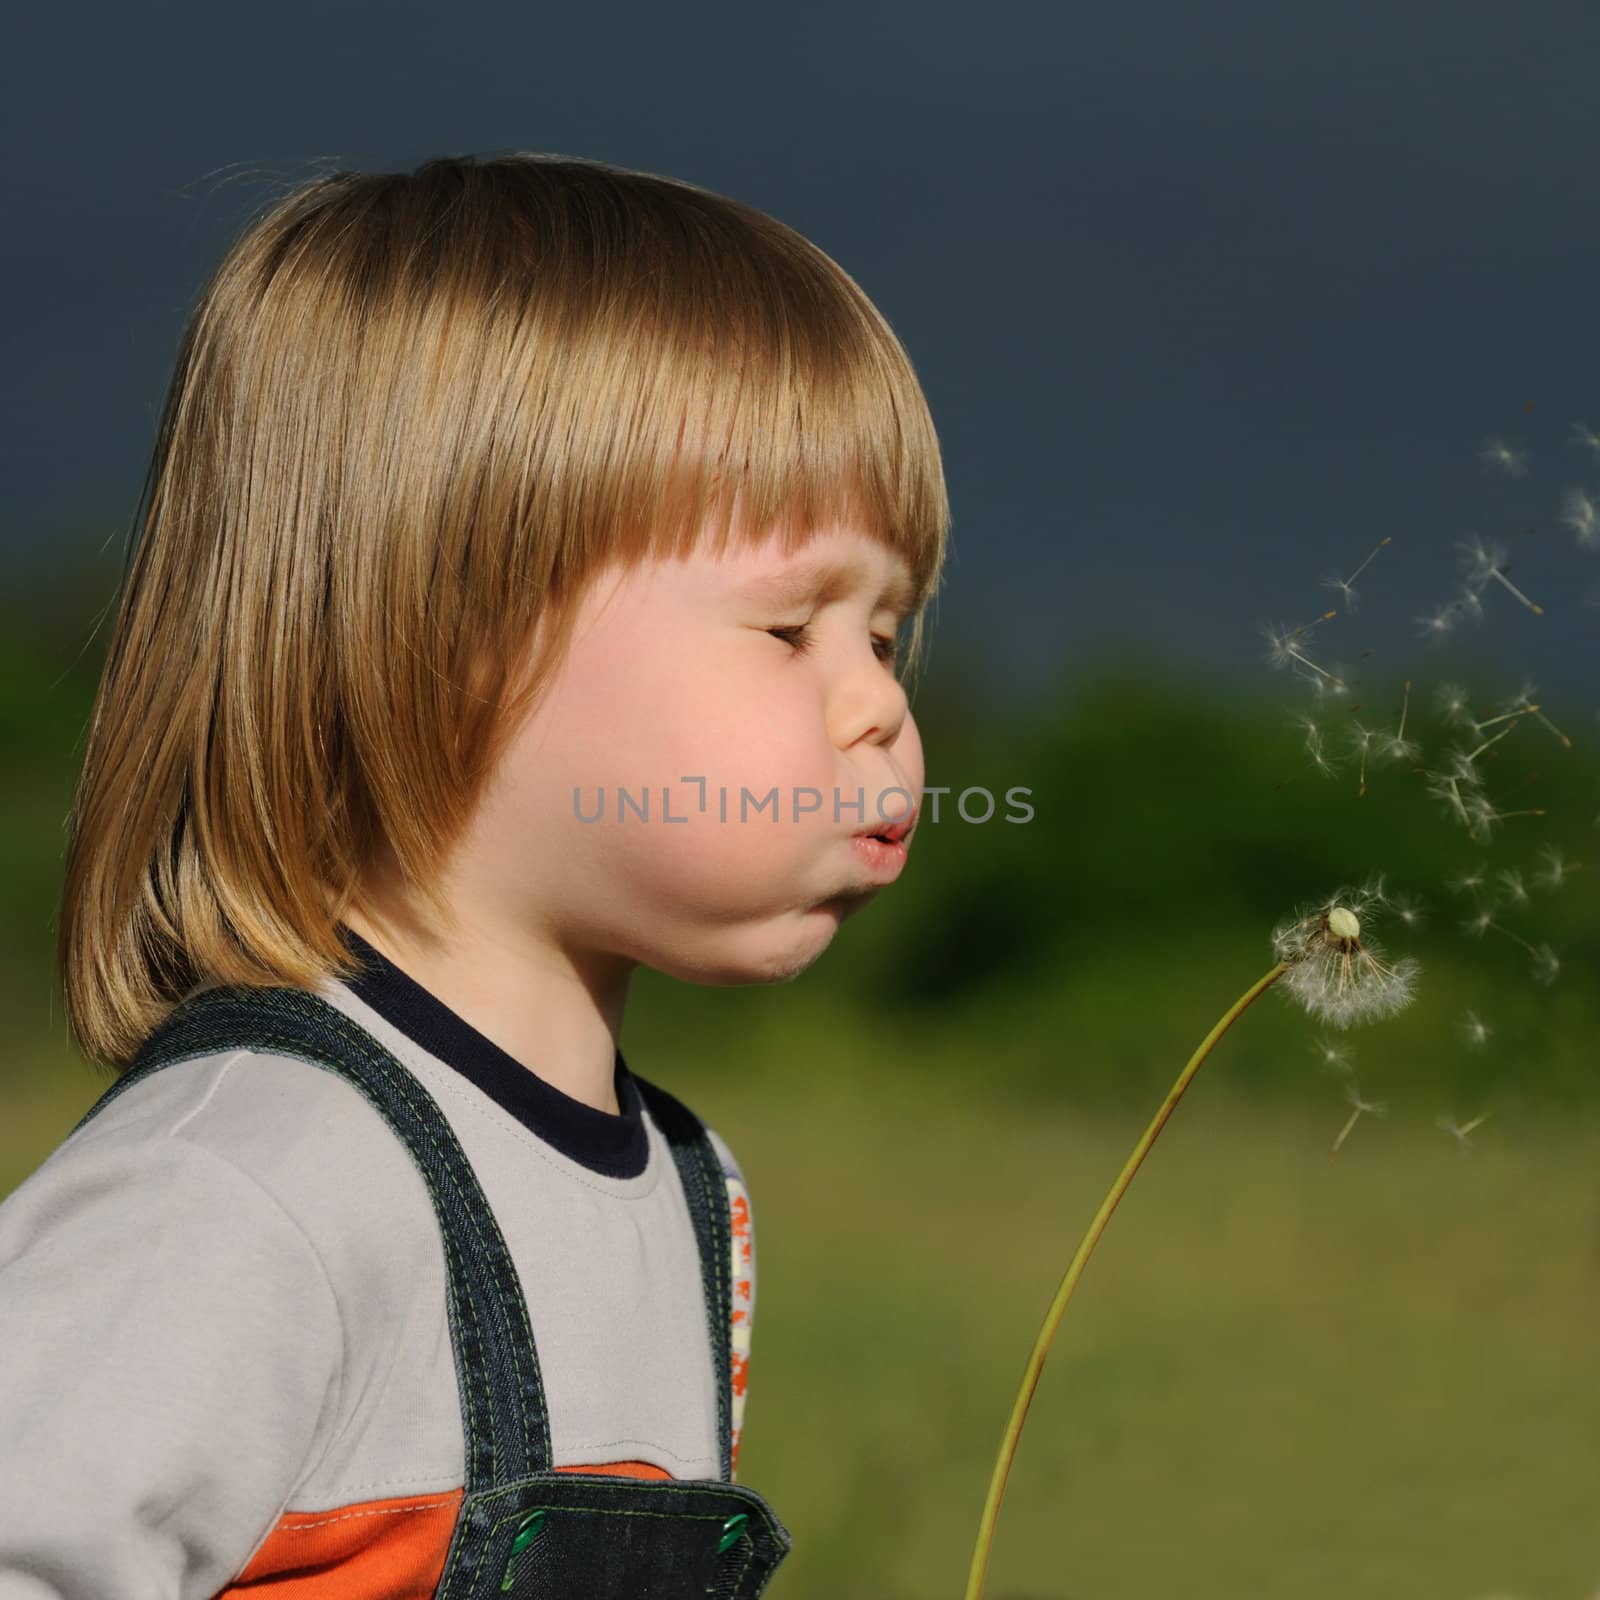 The boy and a dandelion by galdzer